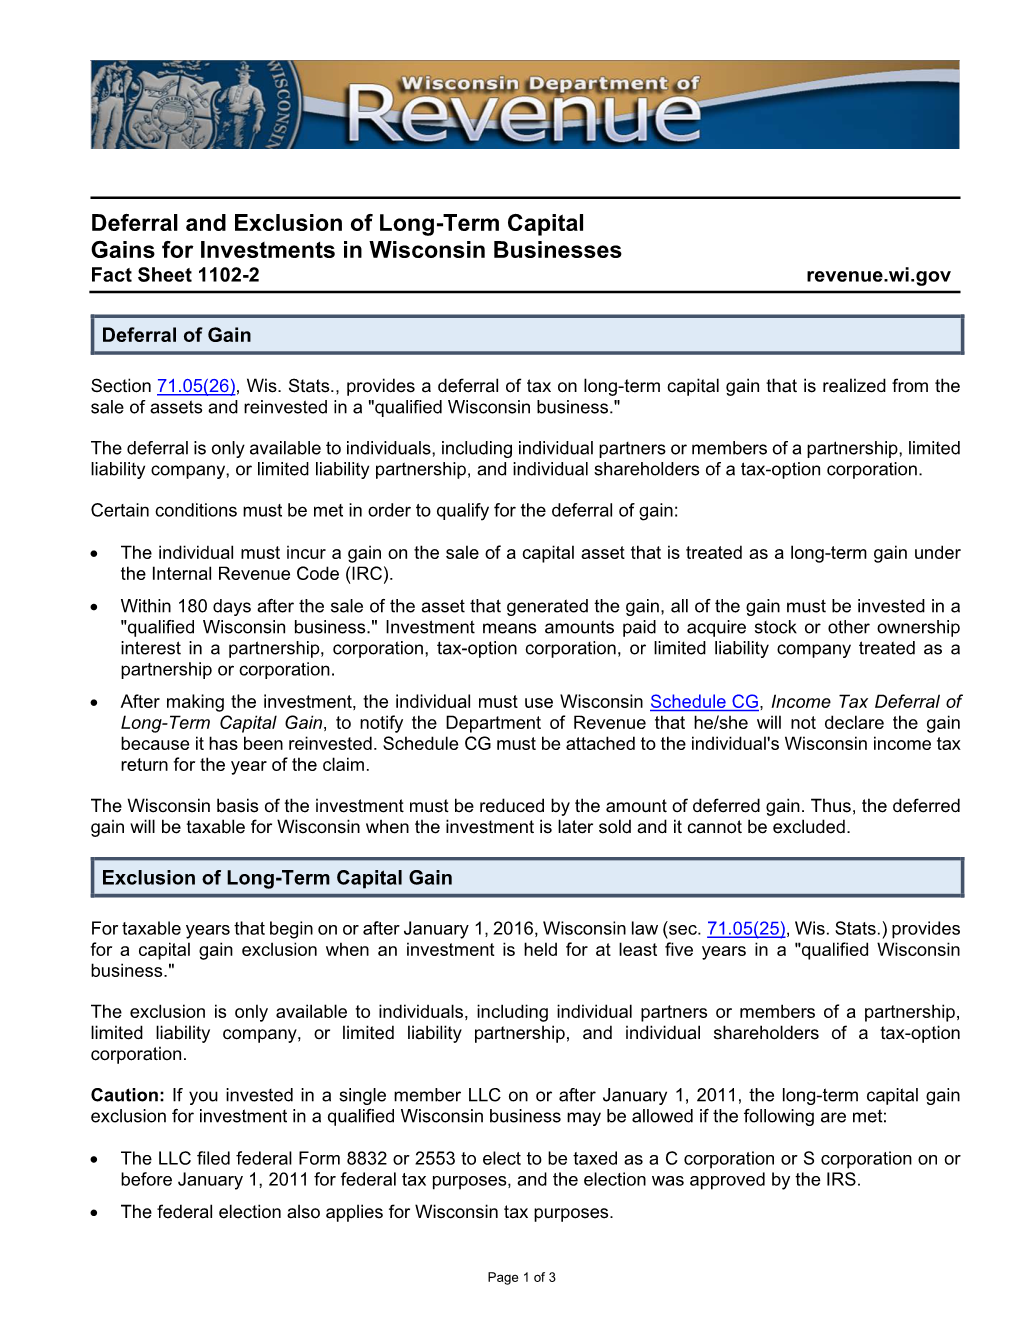 Deferral and Exclusion of Long-Term Capital Gains for Investments in Wisconsin Businesses Fact Sheet 1102-2 Revenue.Wi.Gov